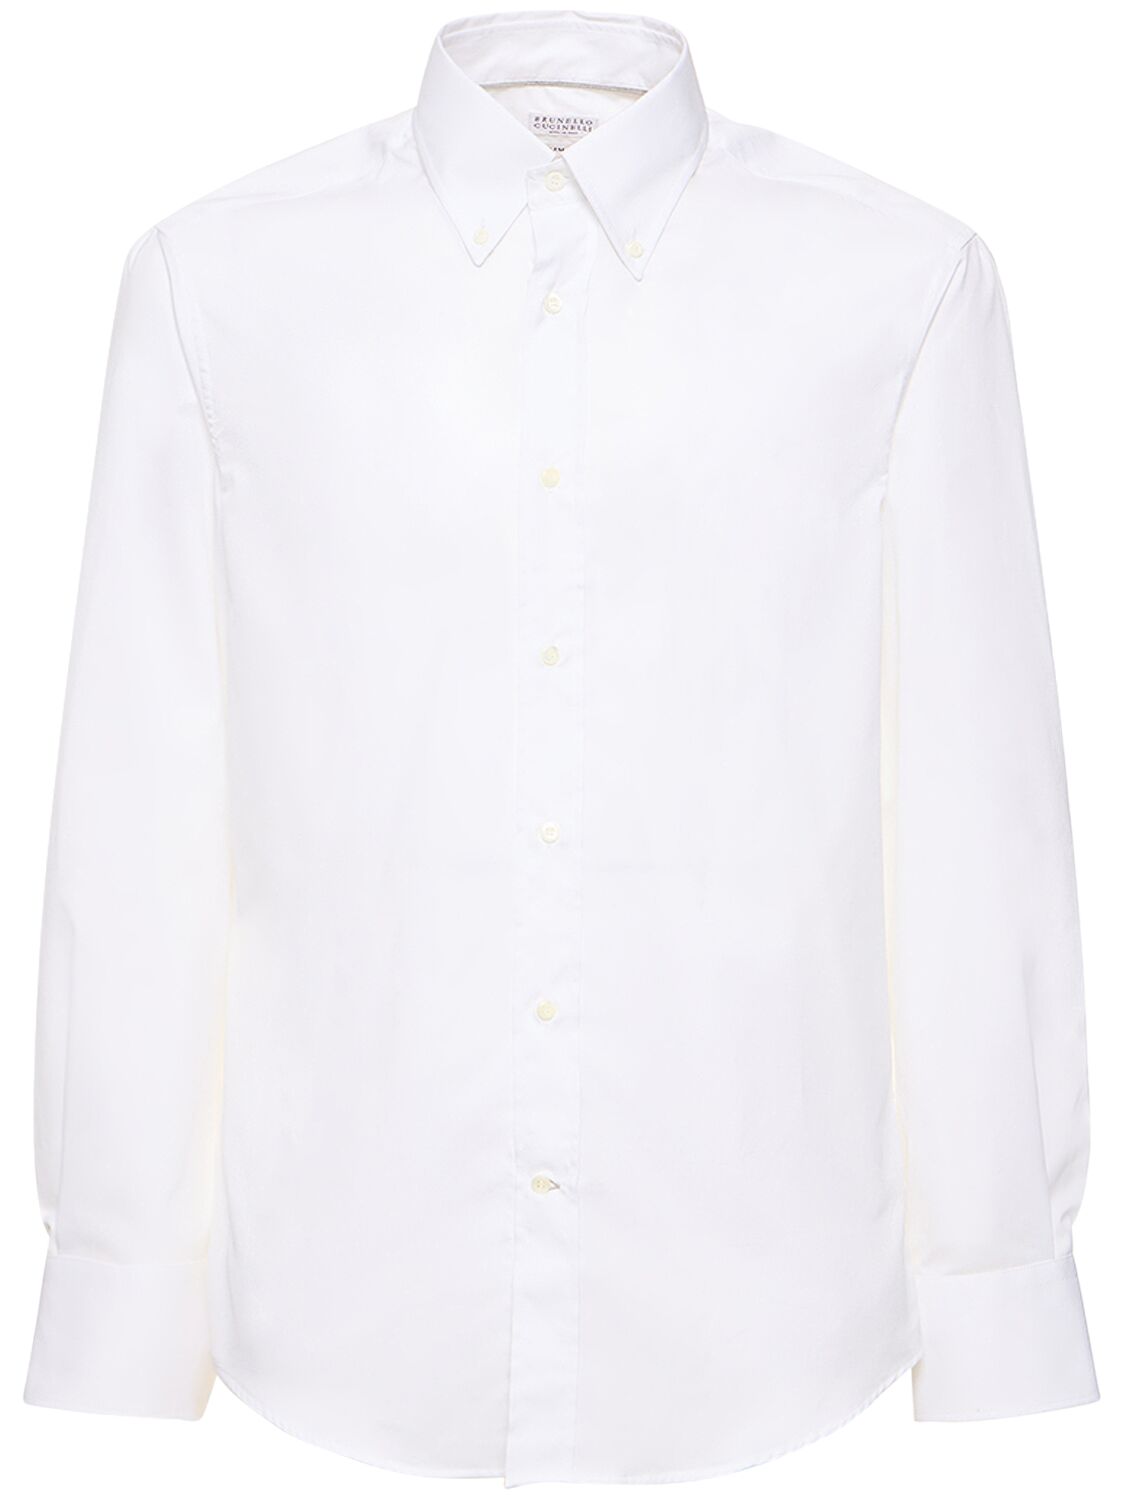 Image of Cotton Twill Button Down Shirt